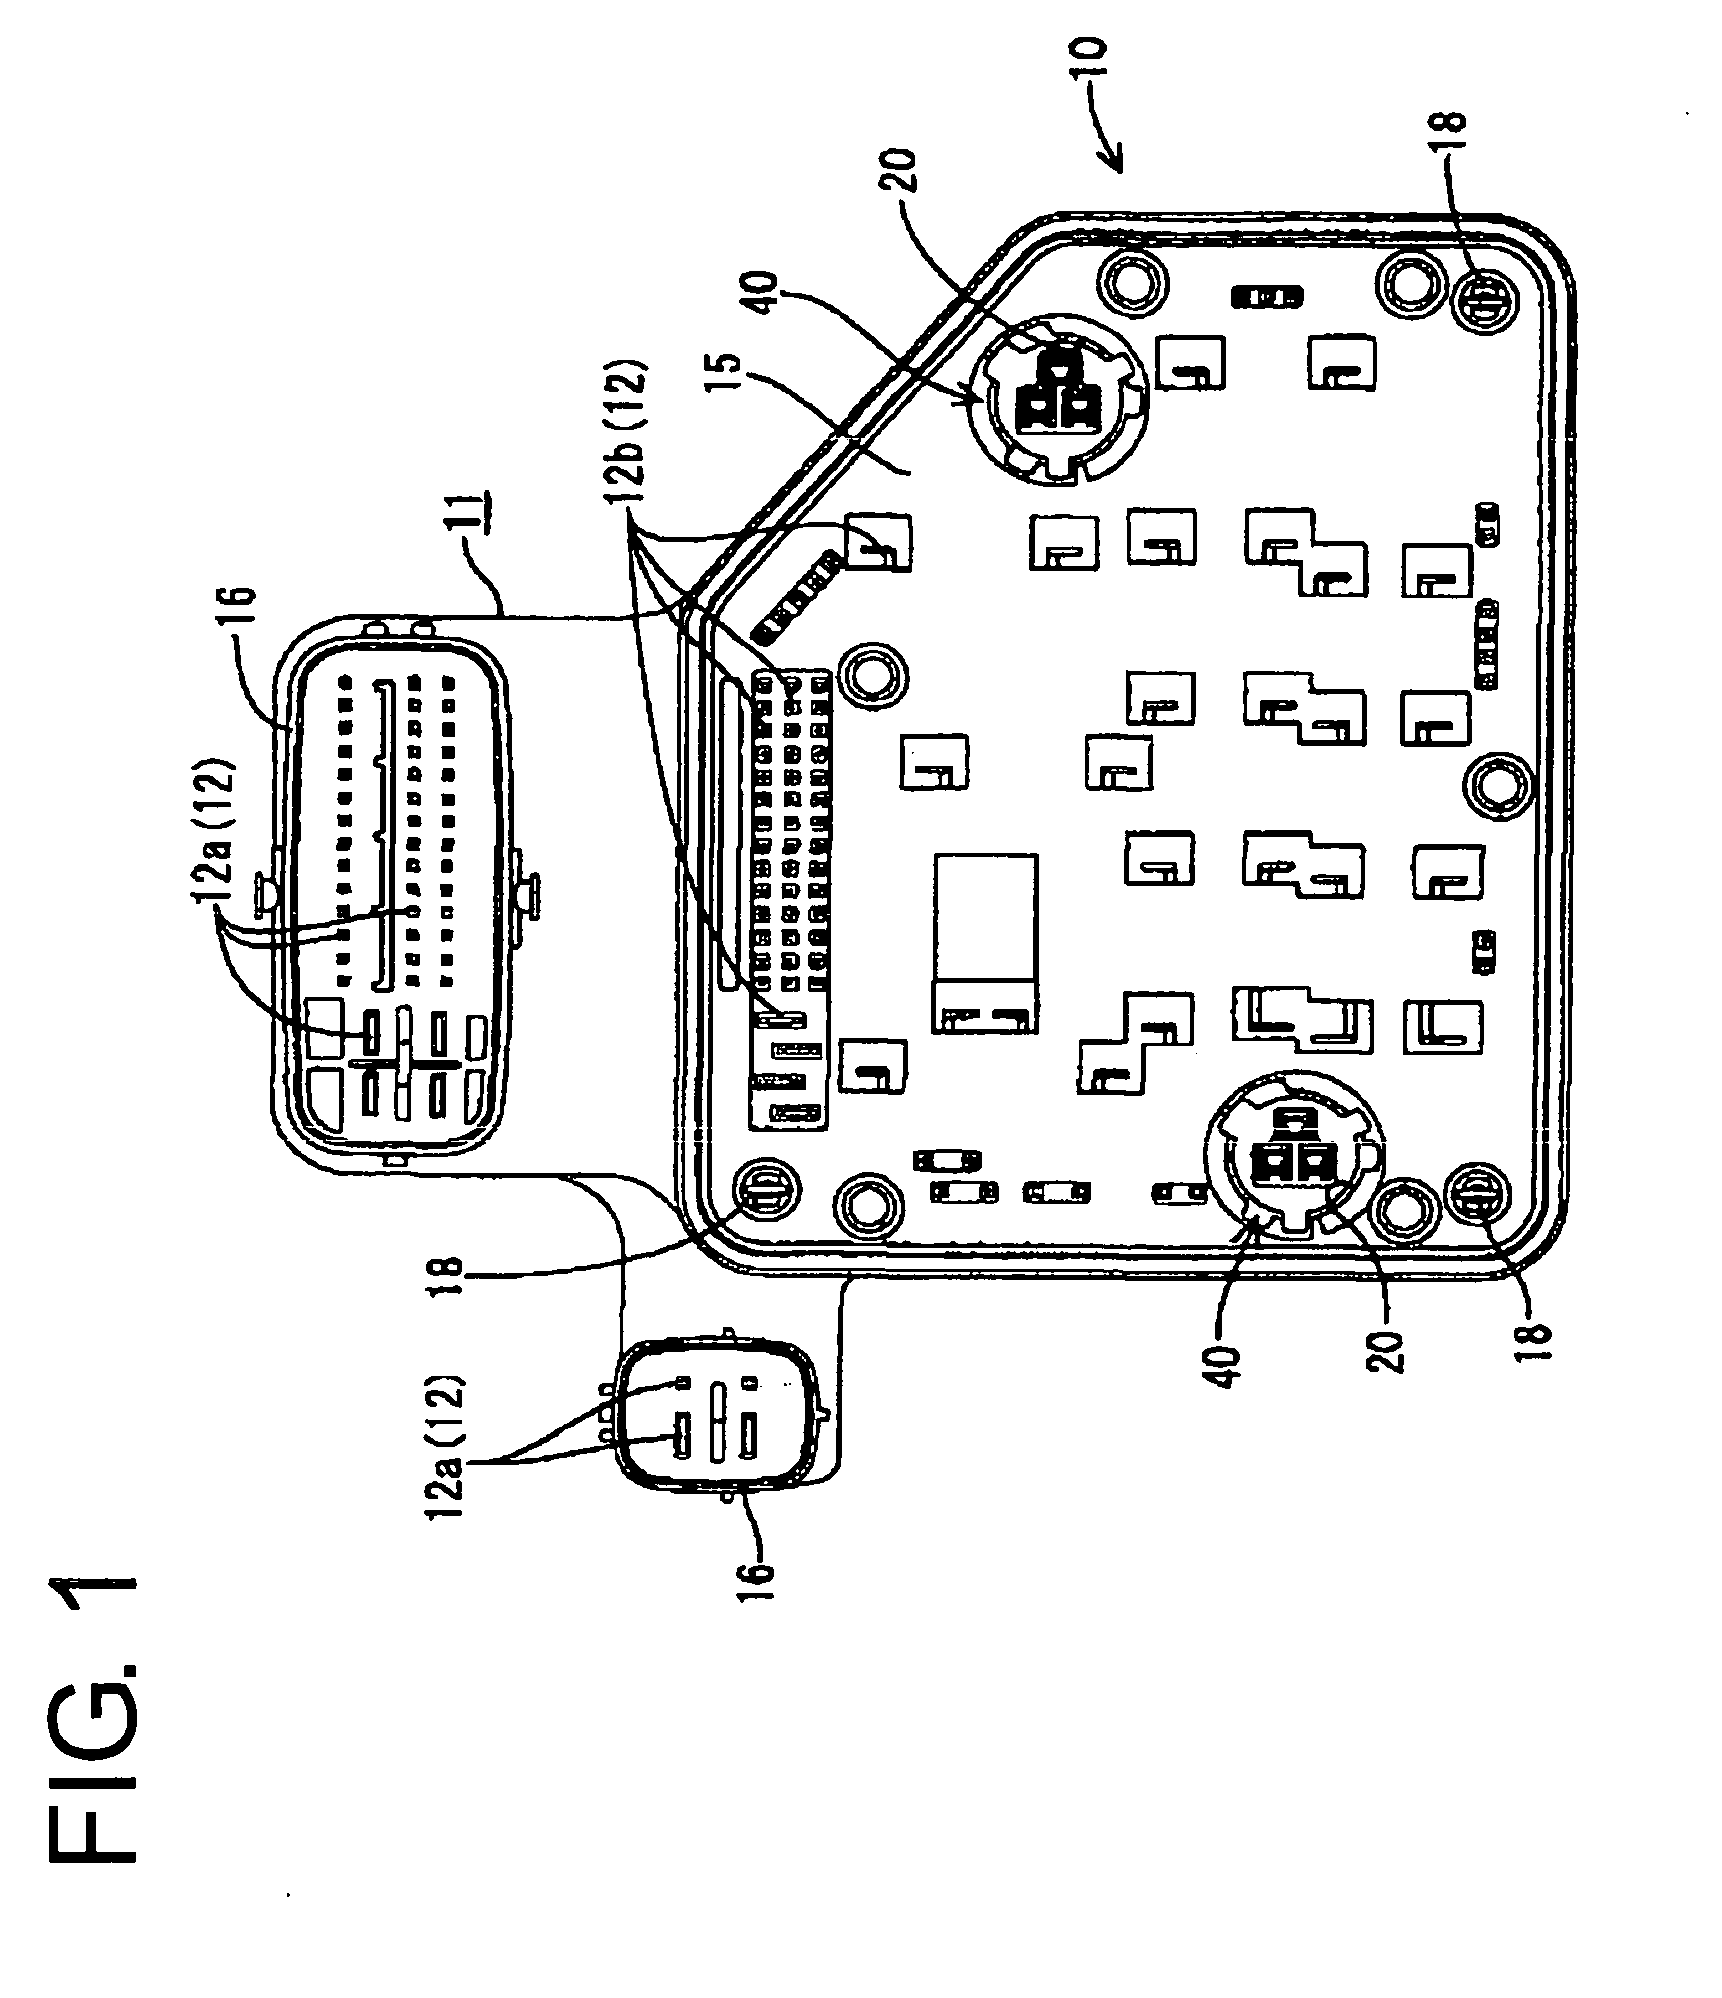 Construction for connecting a circuit board and an electrical part, a brake oil pressure control unit